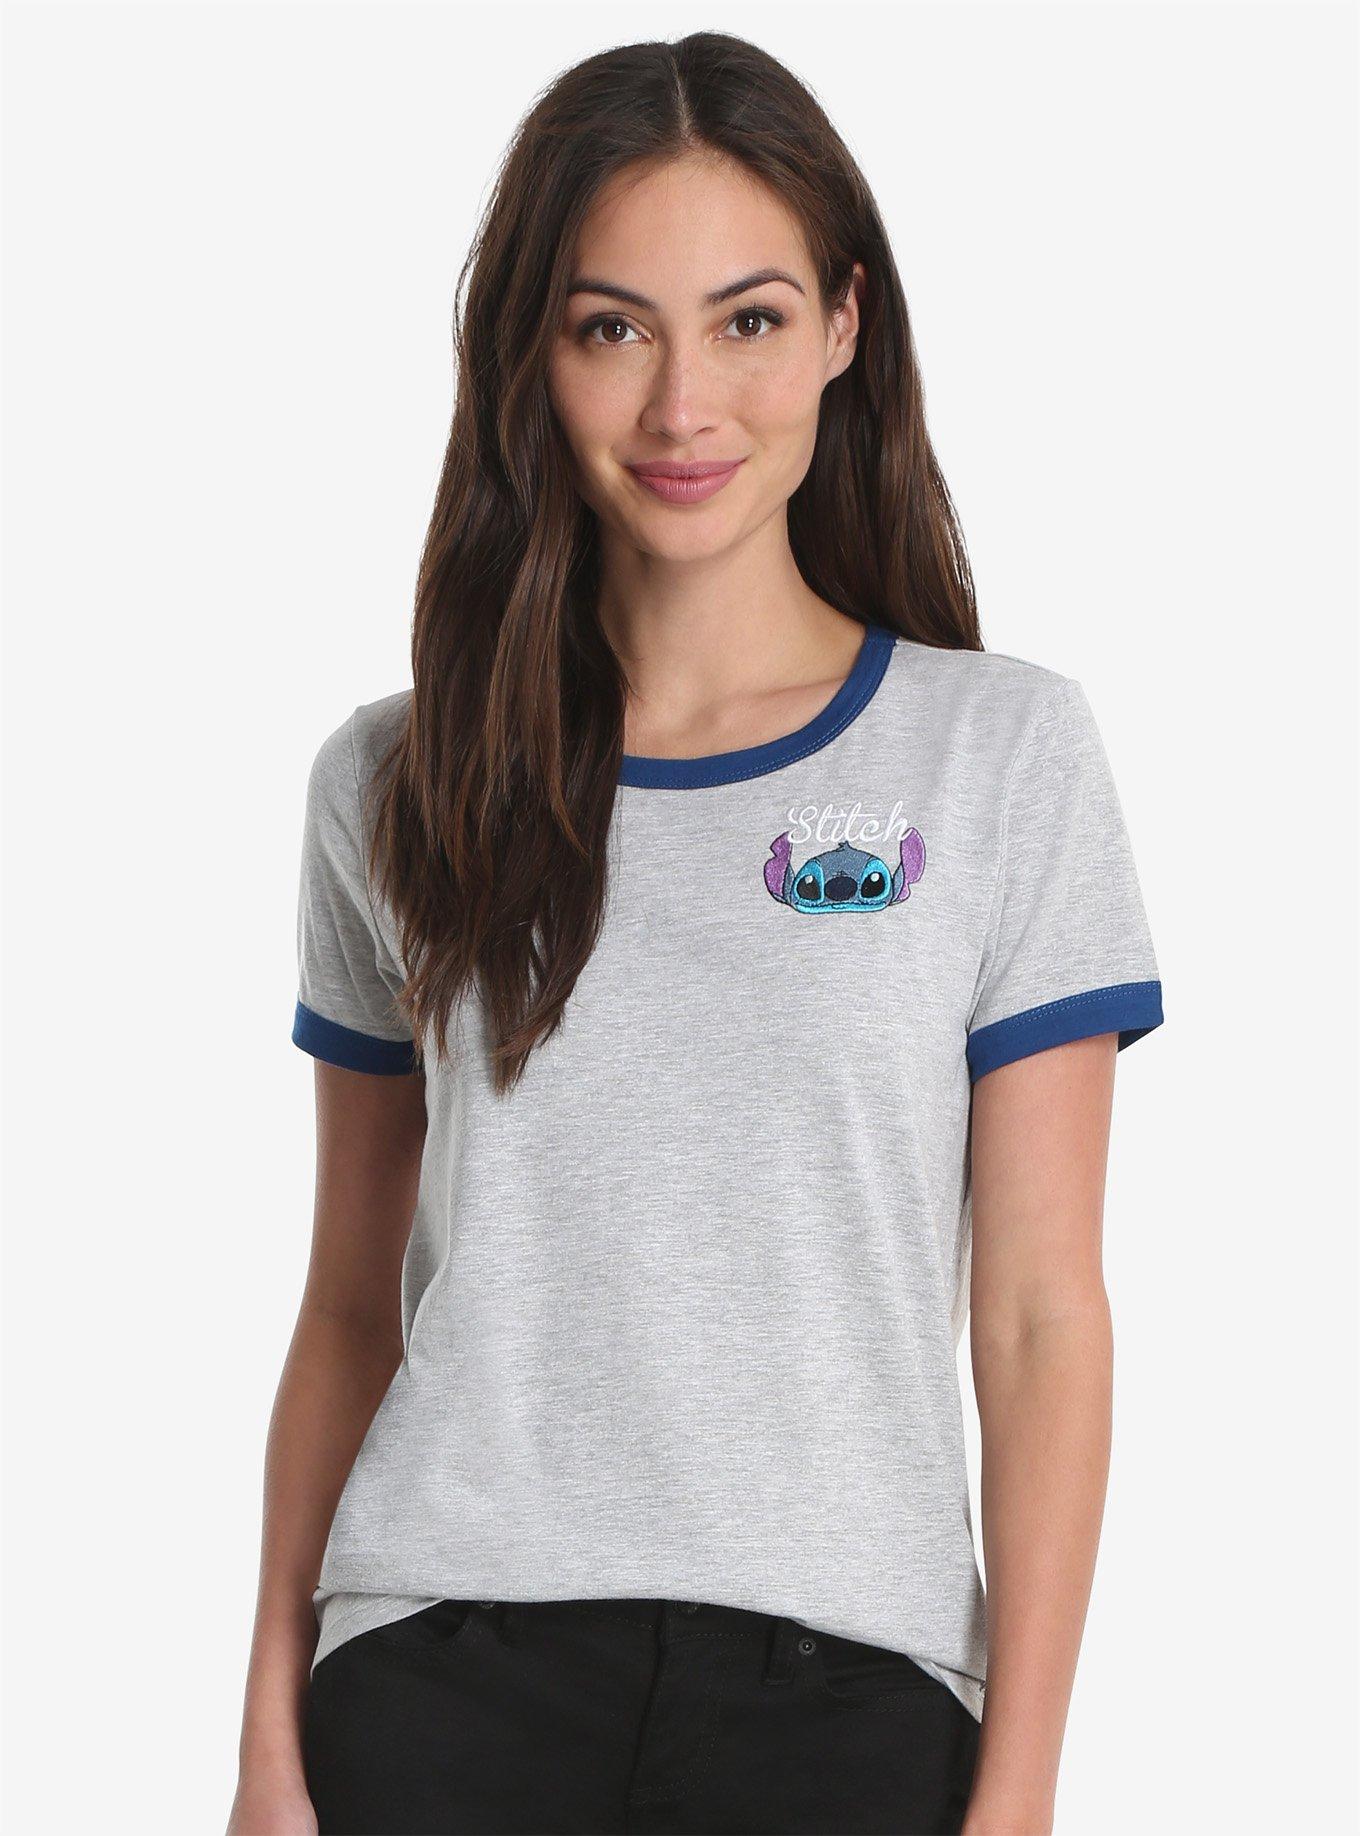 Disney Lilo & Stitch Embroidered Womens Ringer Tee, GREY, hi-res